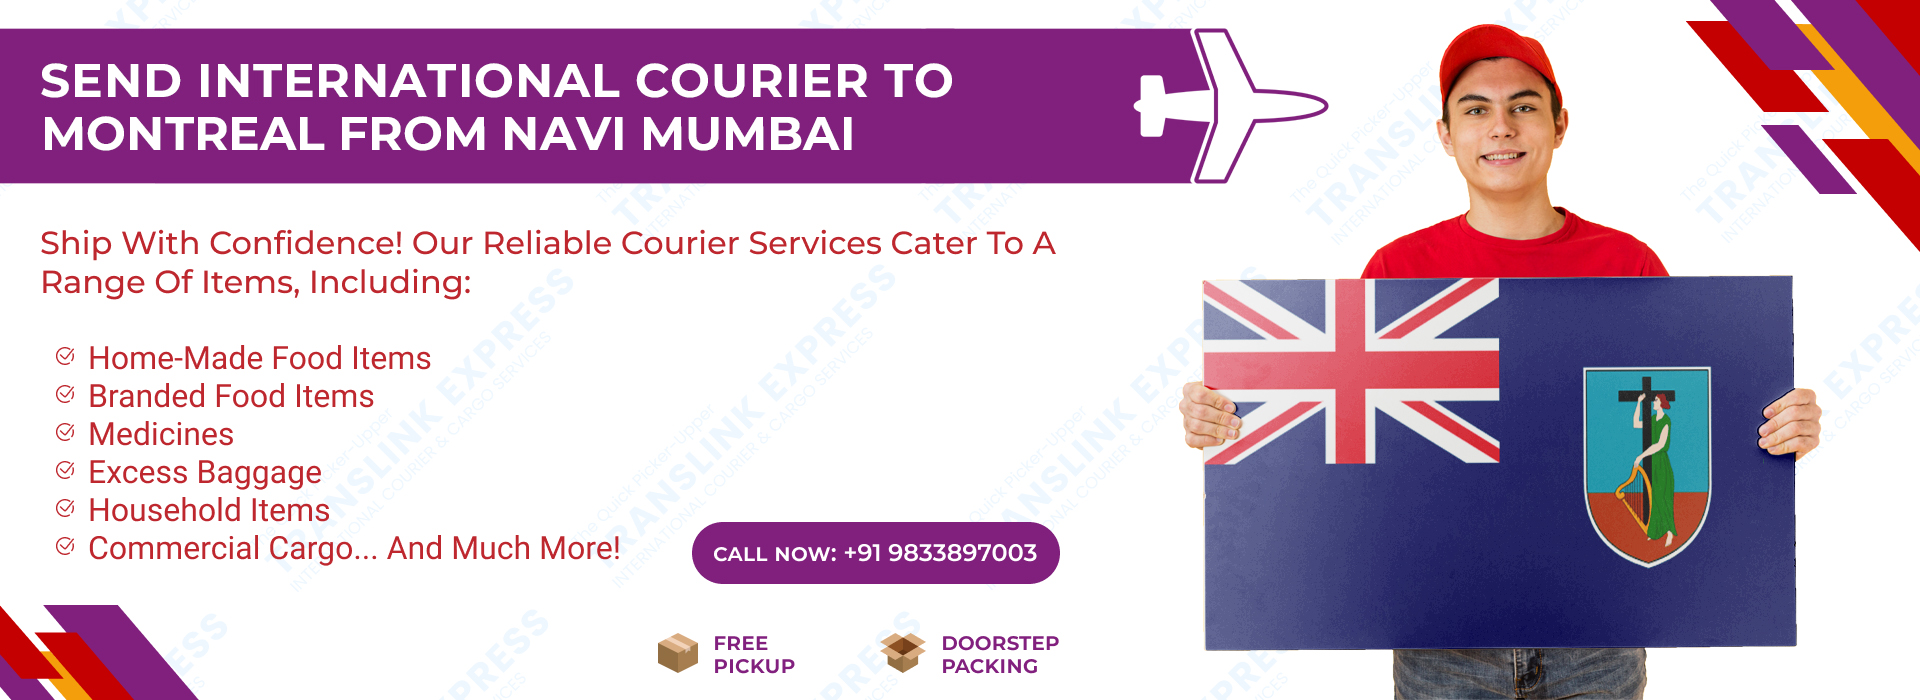 Courier to Montreal From Navi Mumbai